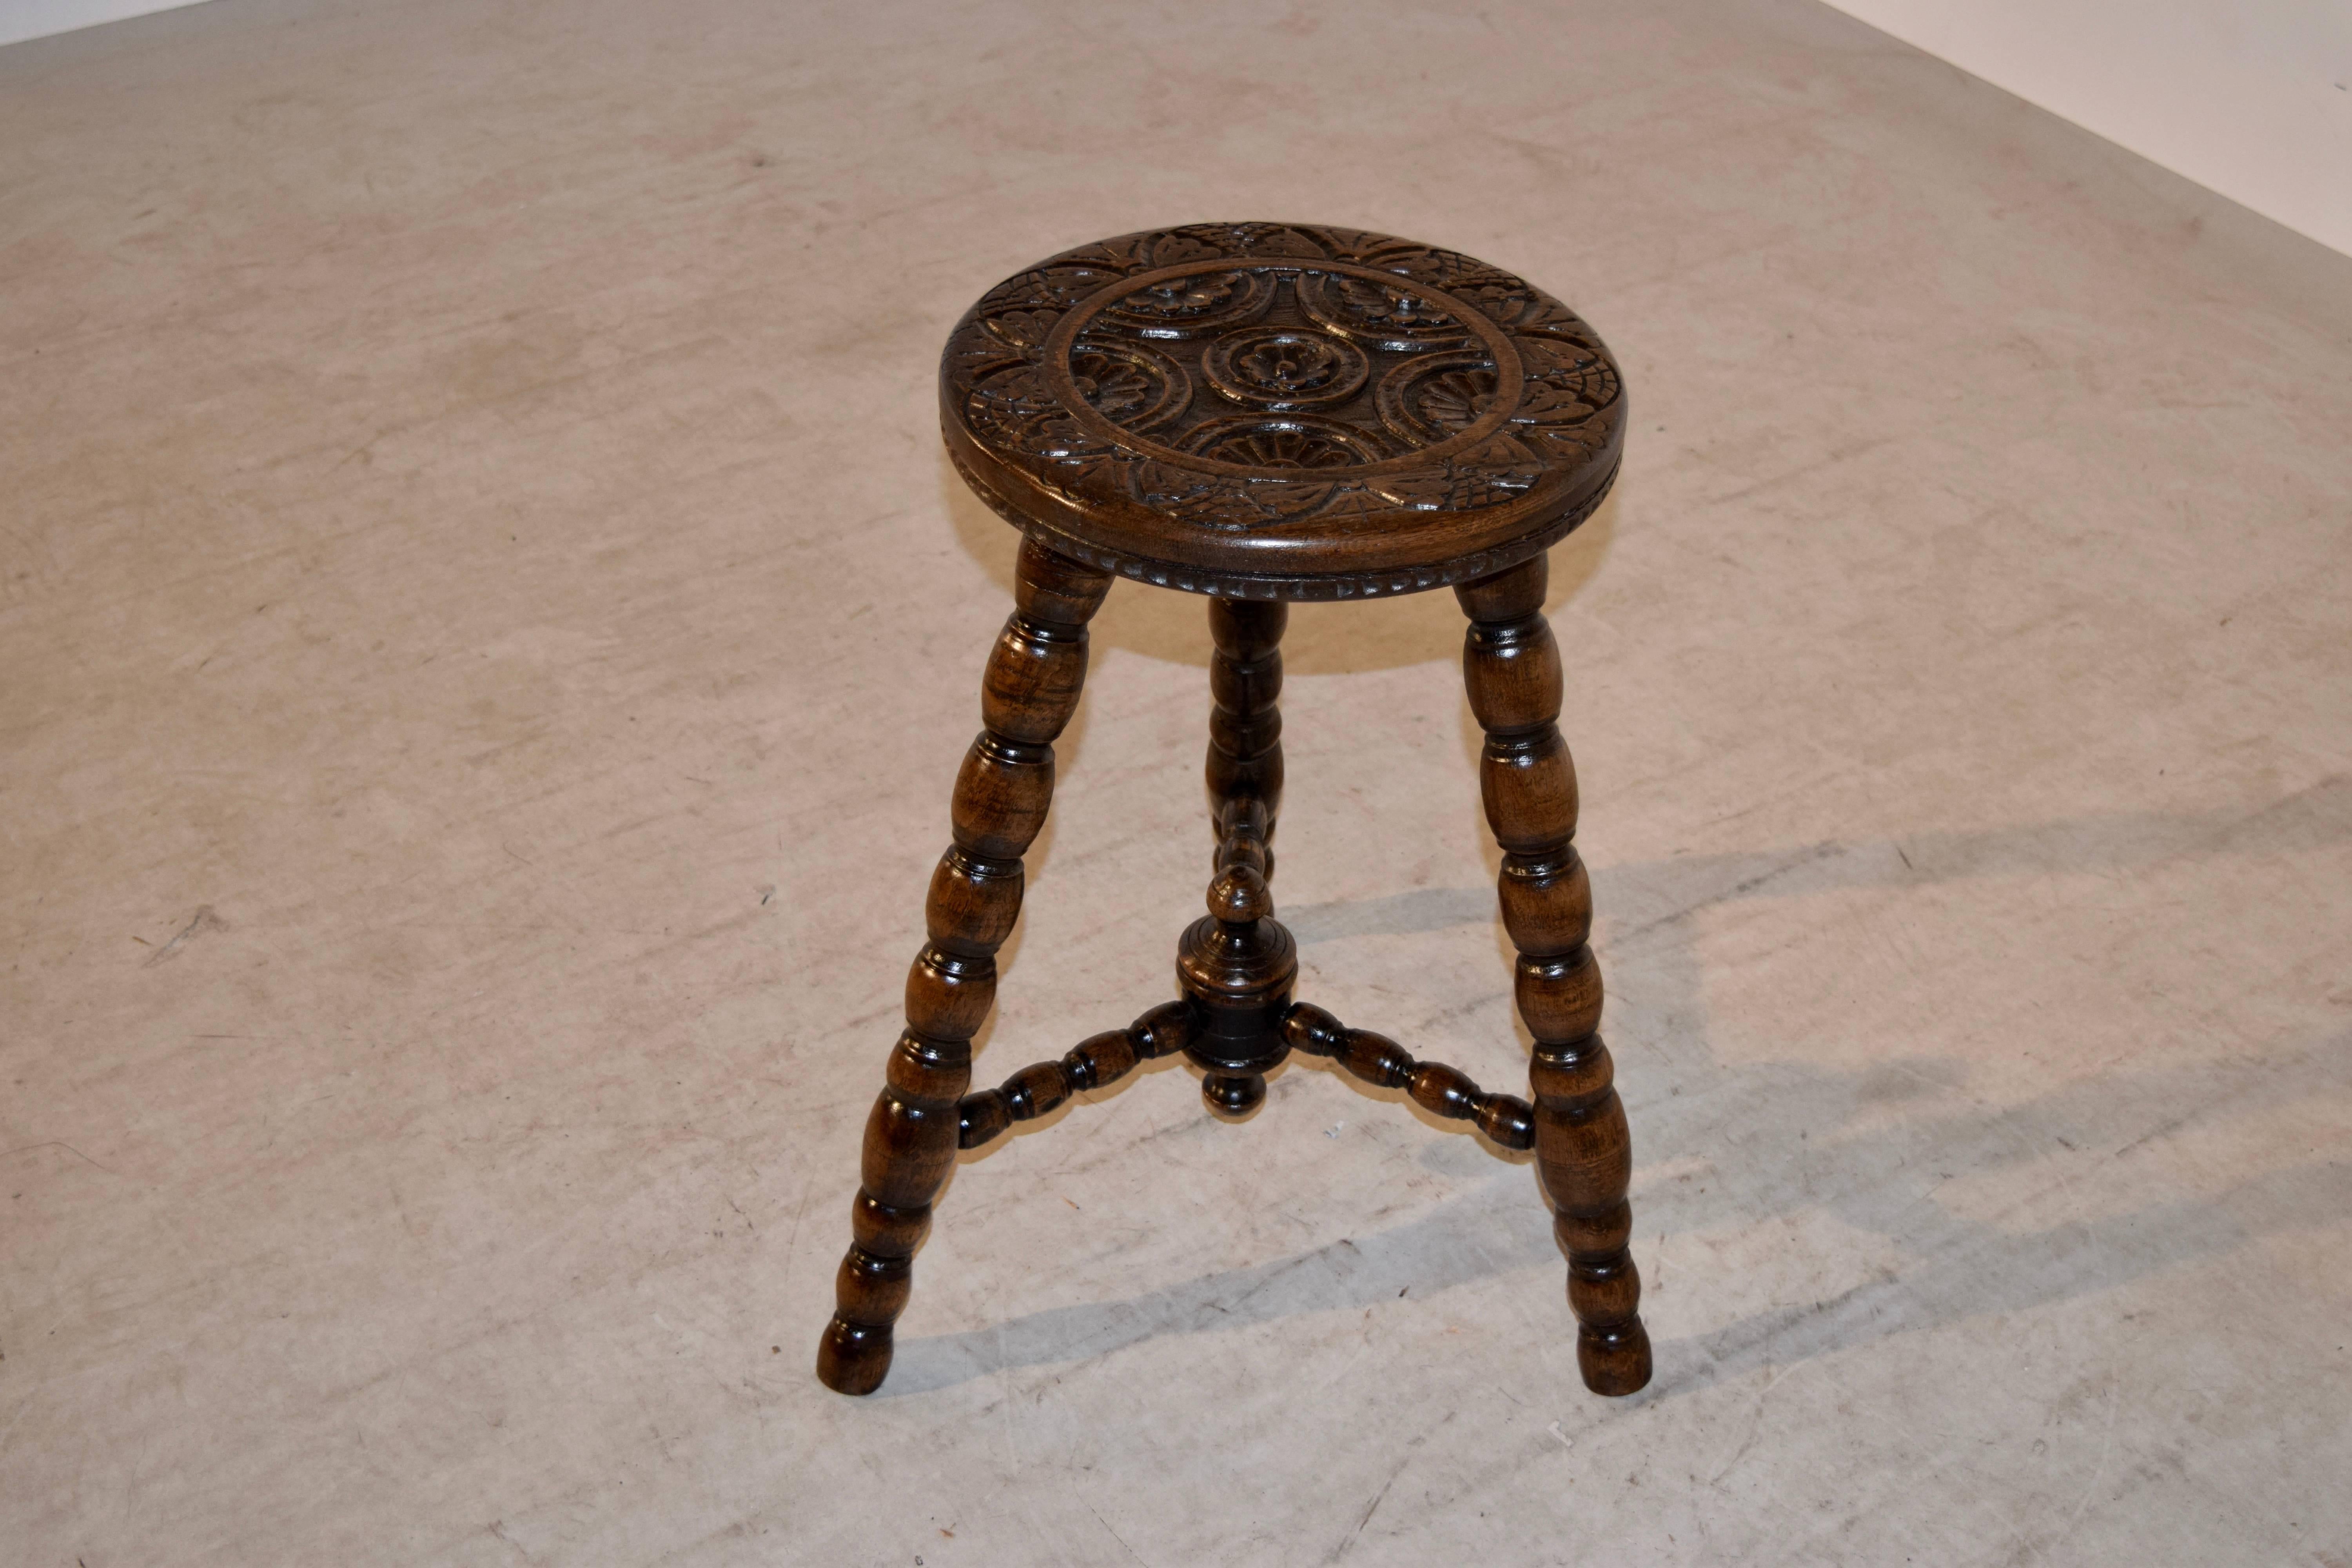 19th century English oak stool with a hand-carved decorated top, supported upon hand-turned spool legs, joined by matching stretchers, finished with a finial. The seat diameter is 12 inches.